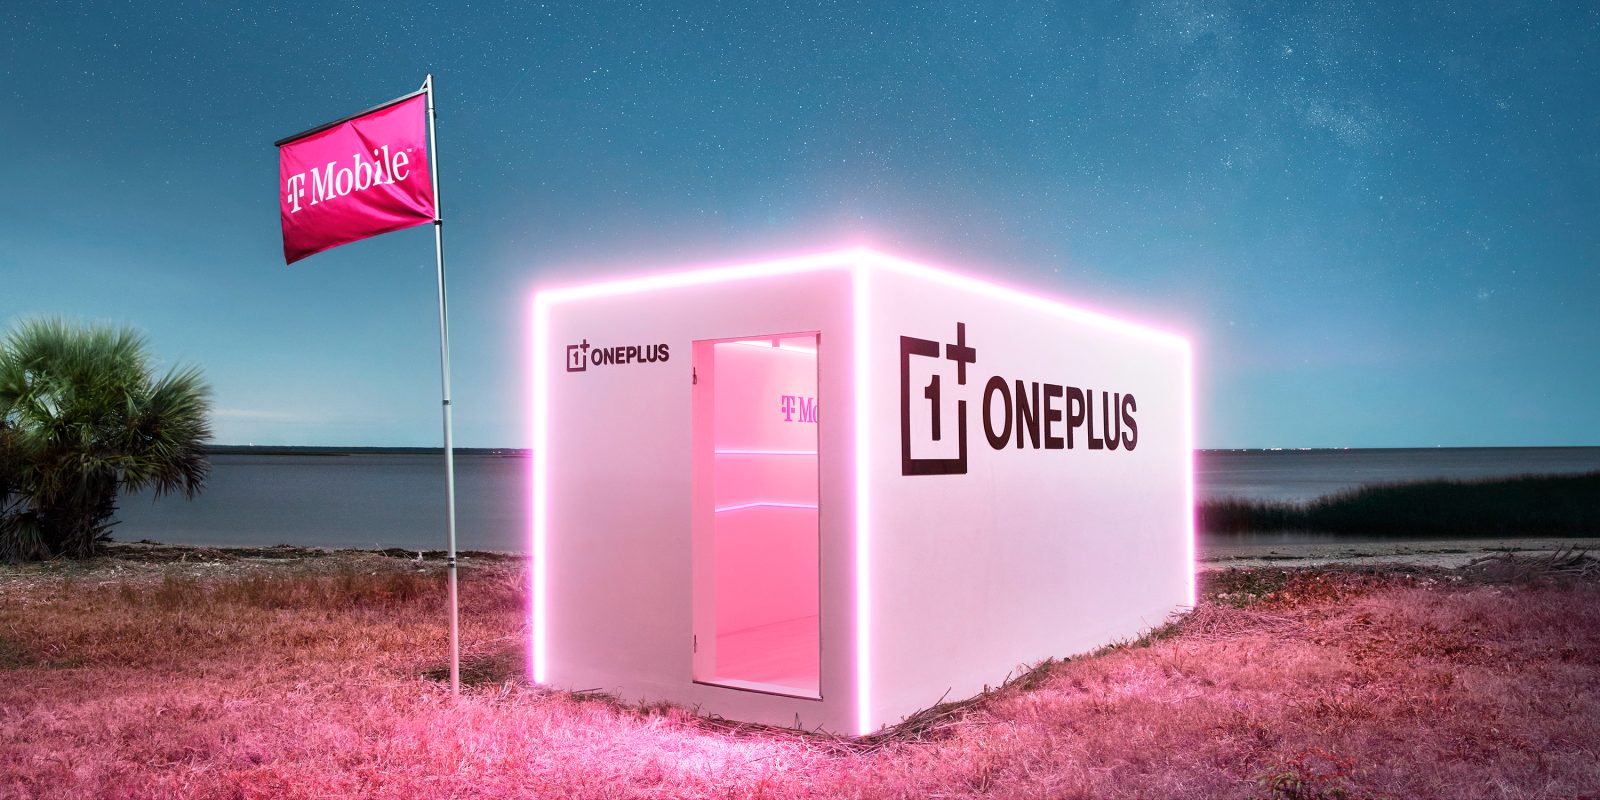 oneplus t-mobile contest pop-up stores